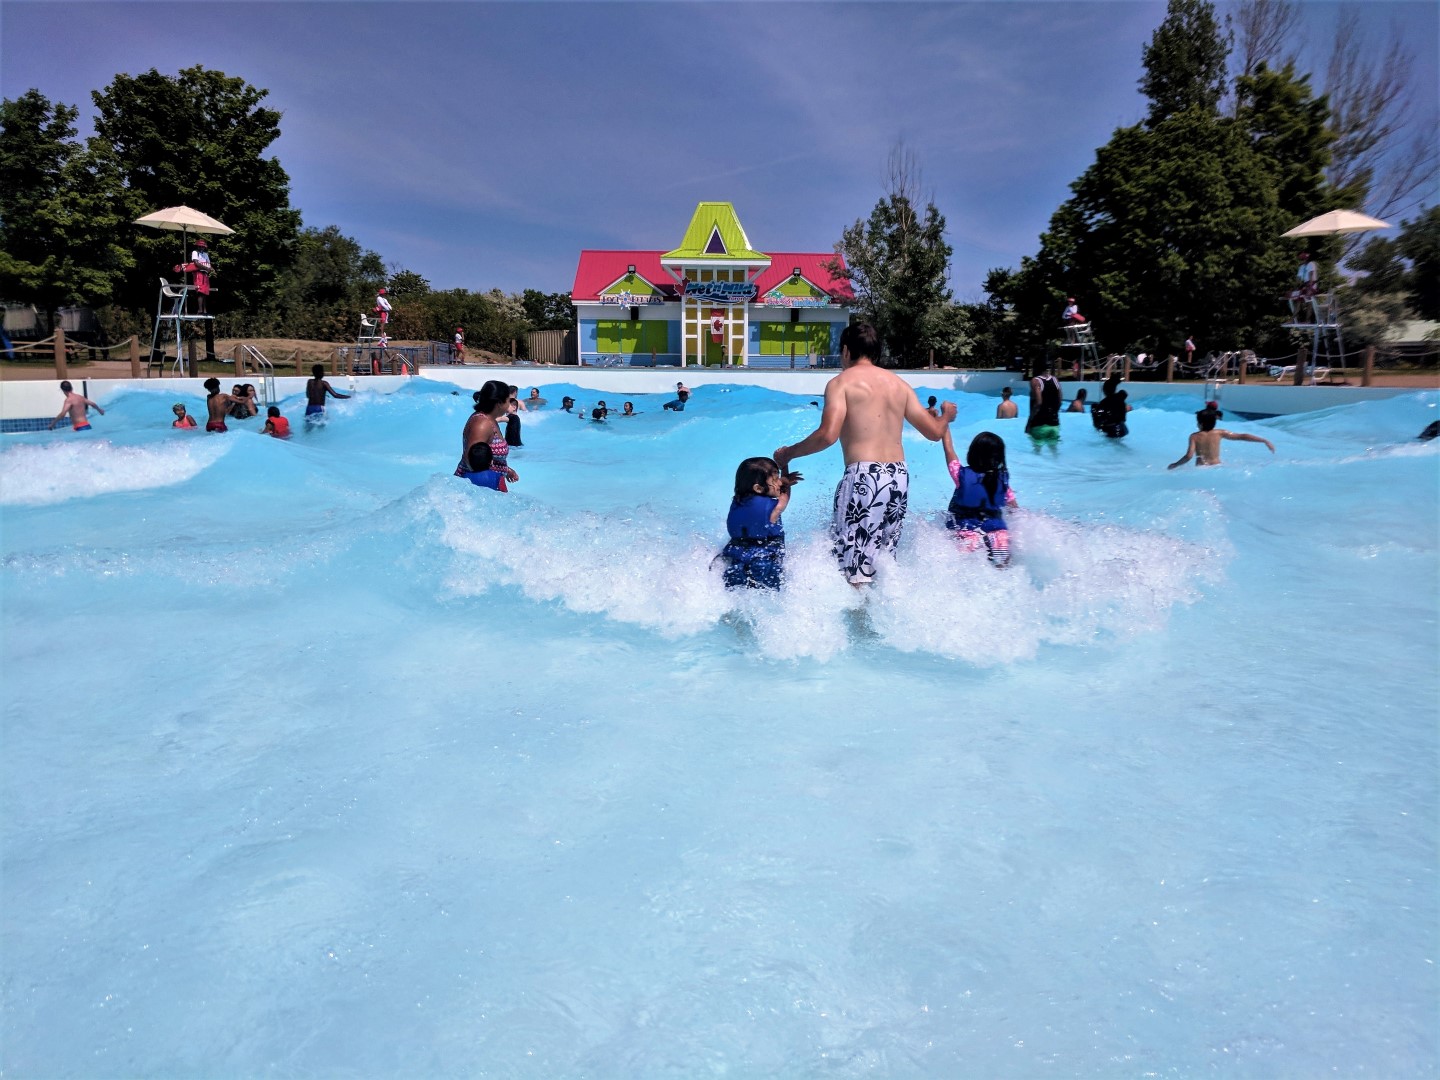 Get Your Water Park Fix This Summer at Wet'n'Wild Toronto - Help